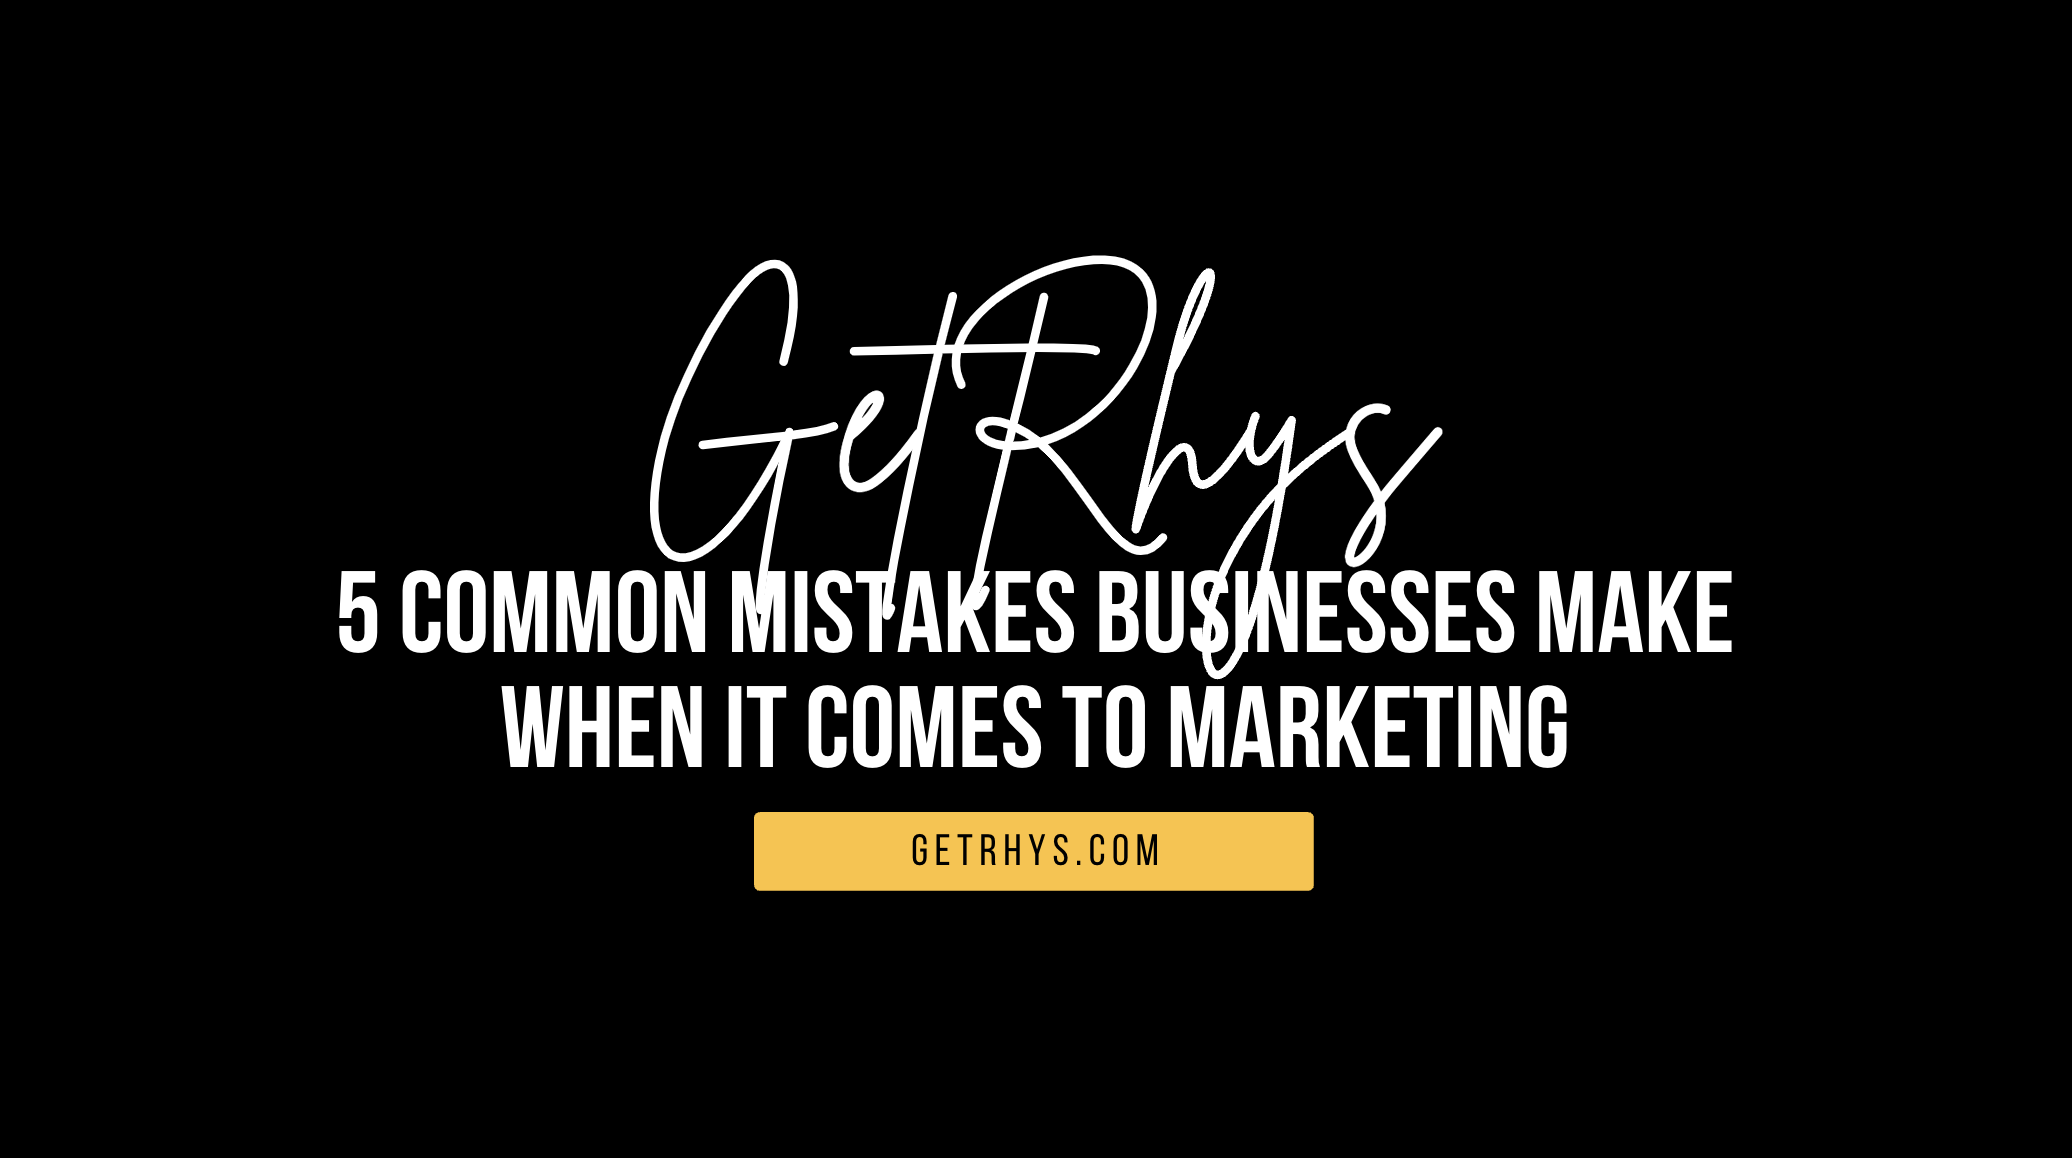 5 common mistakes businesses make when it comes to marketing